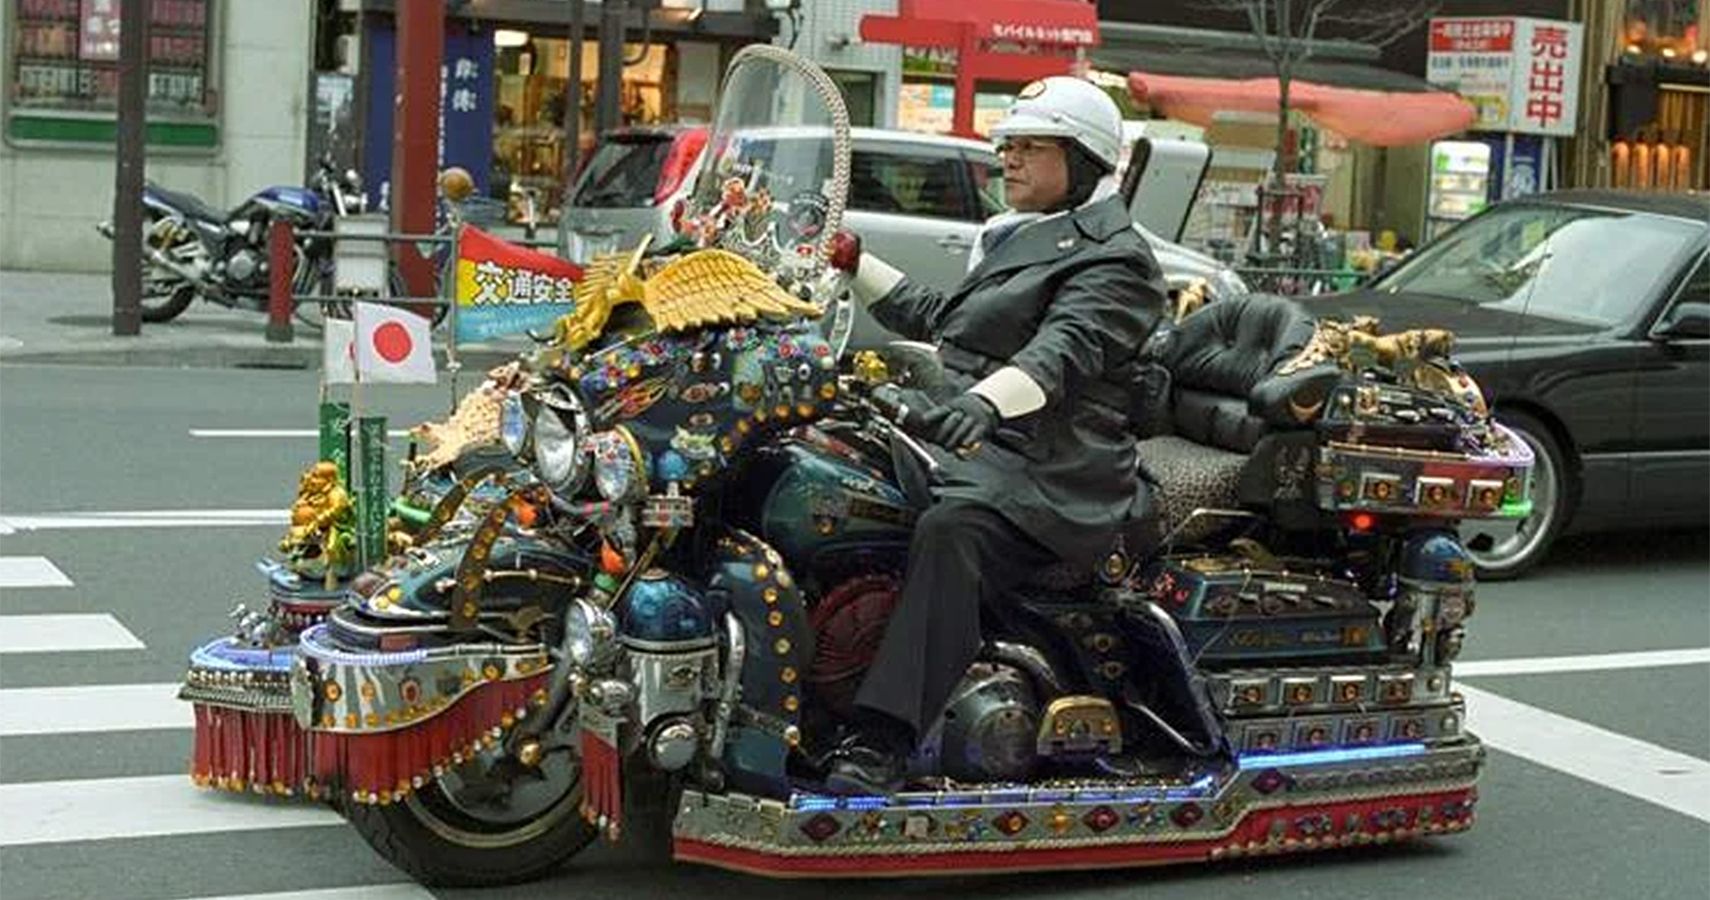 The Motorcycle Of A Hoarder